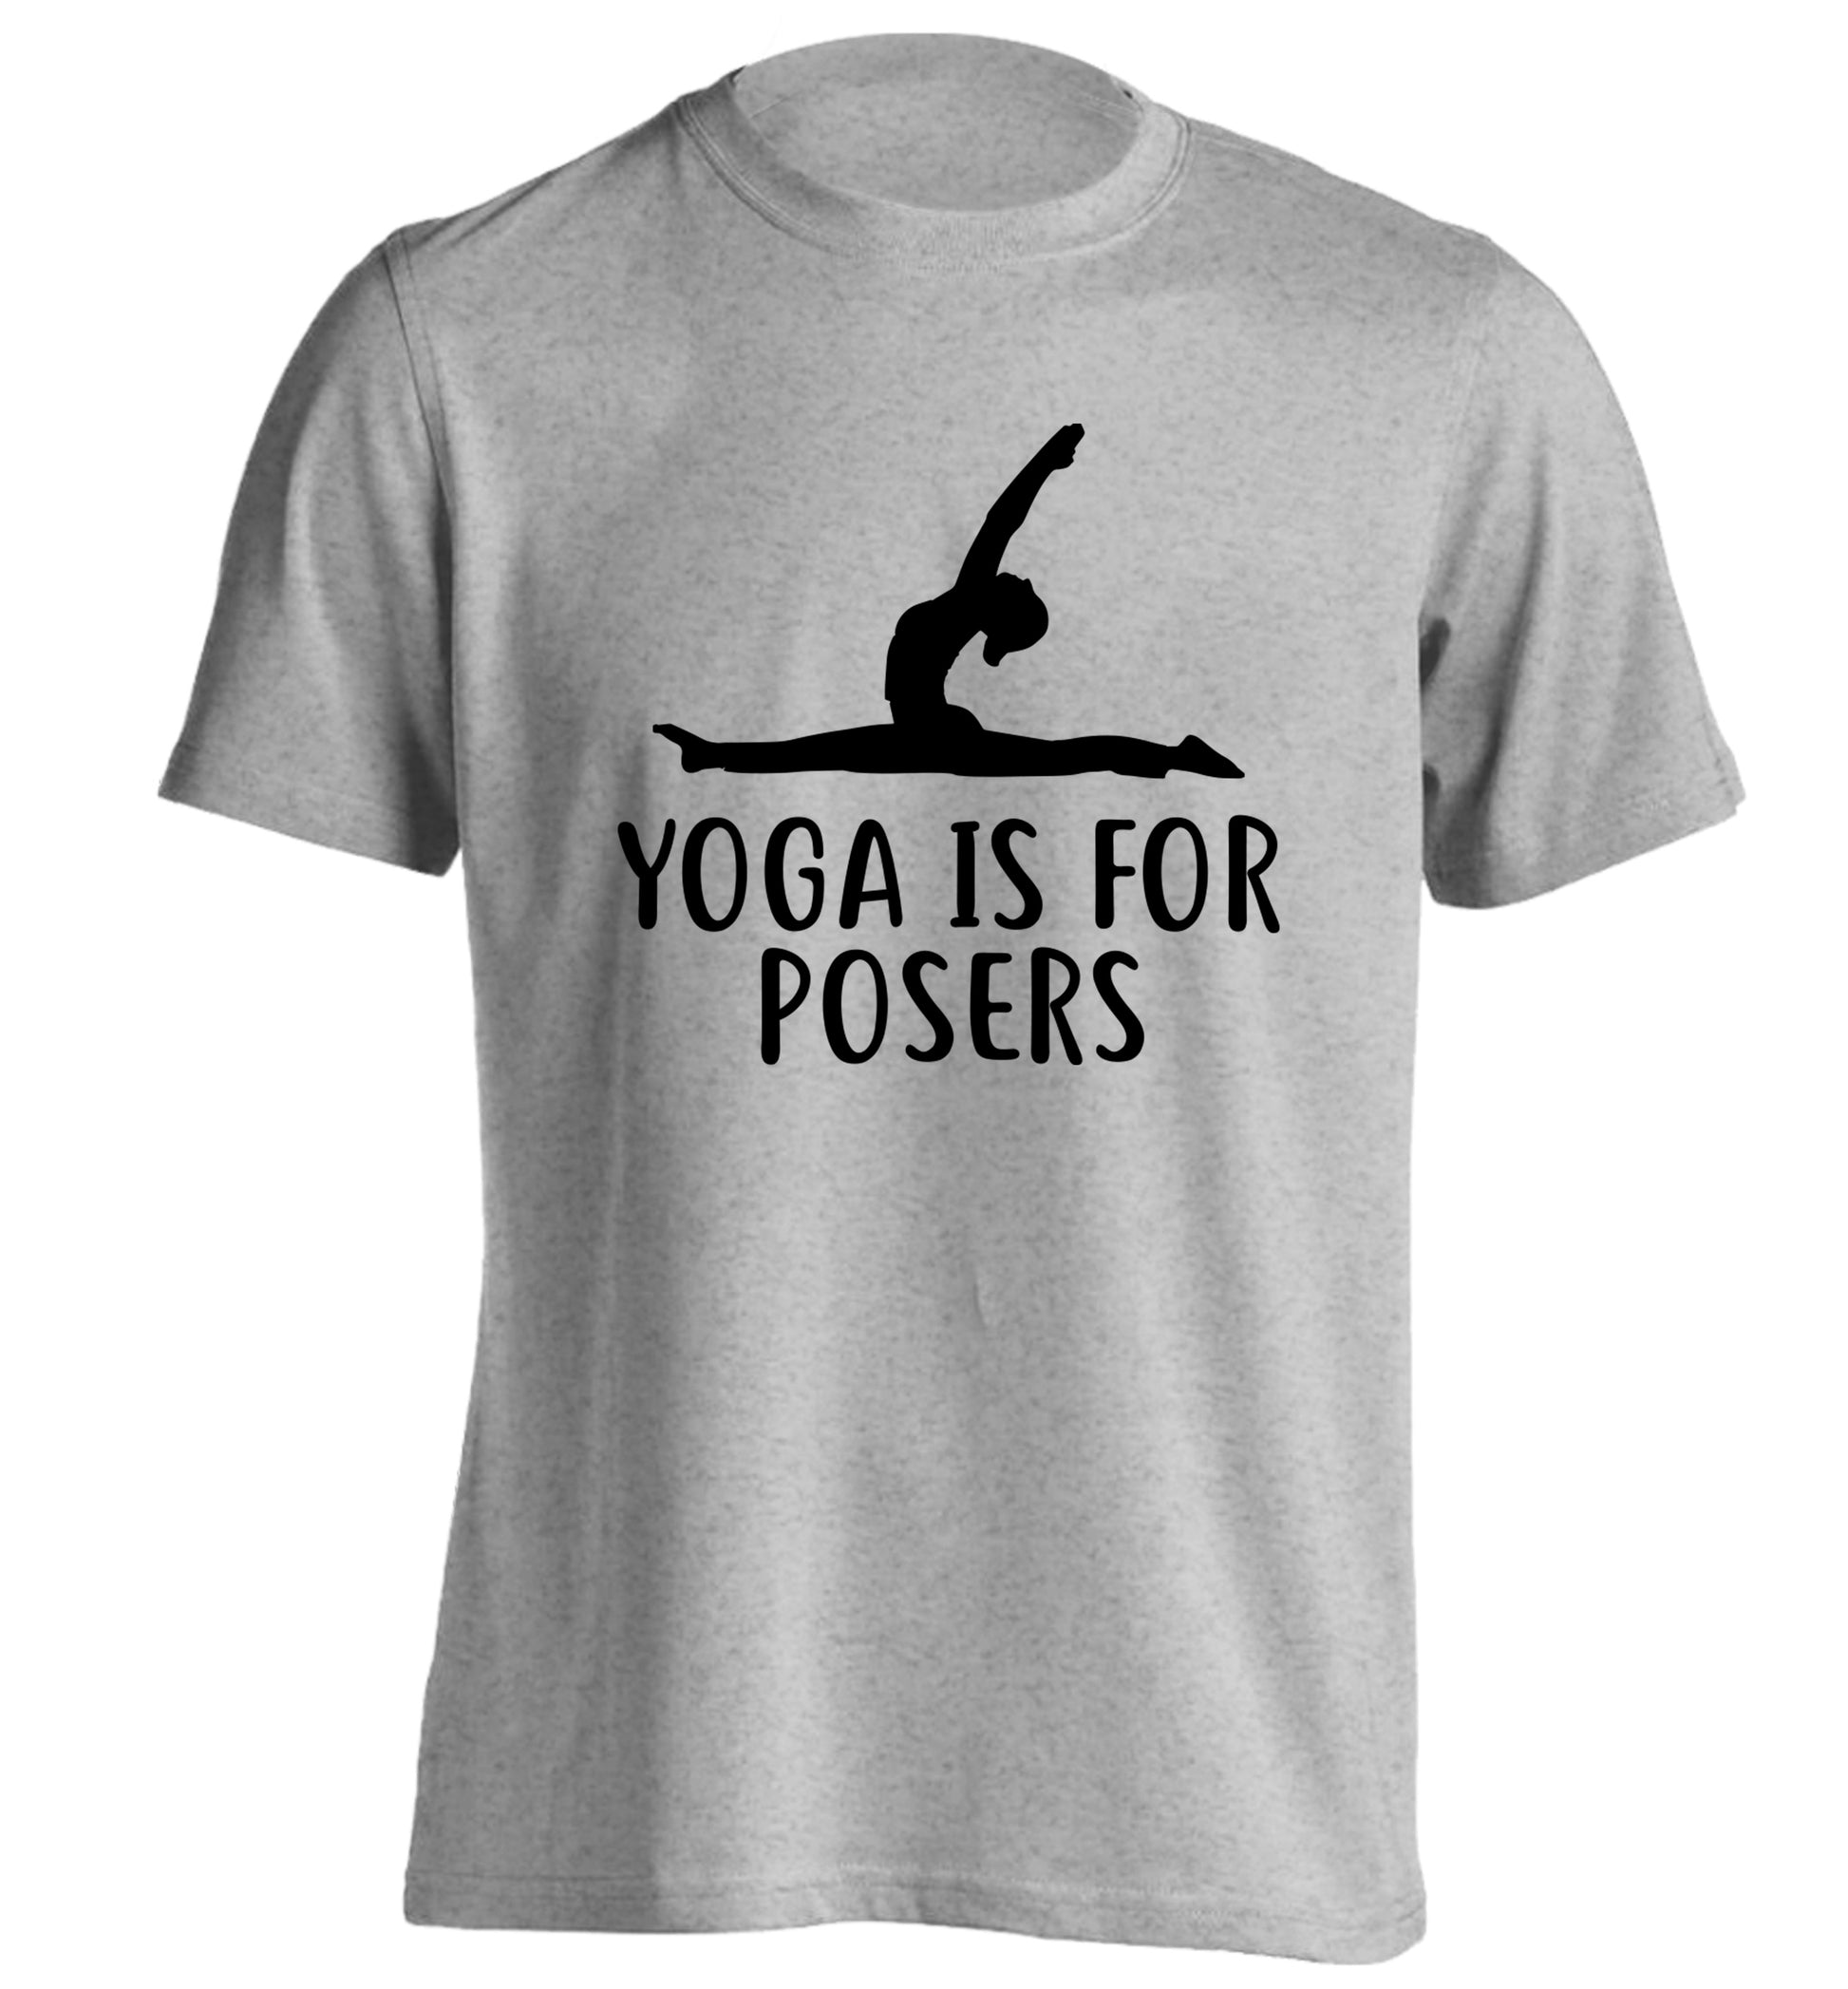 Yoga is for posers adults unisex grey Tshirt 2XL